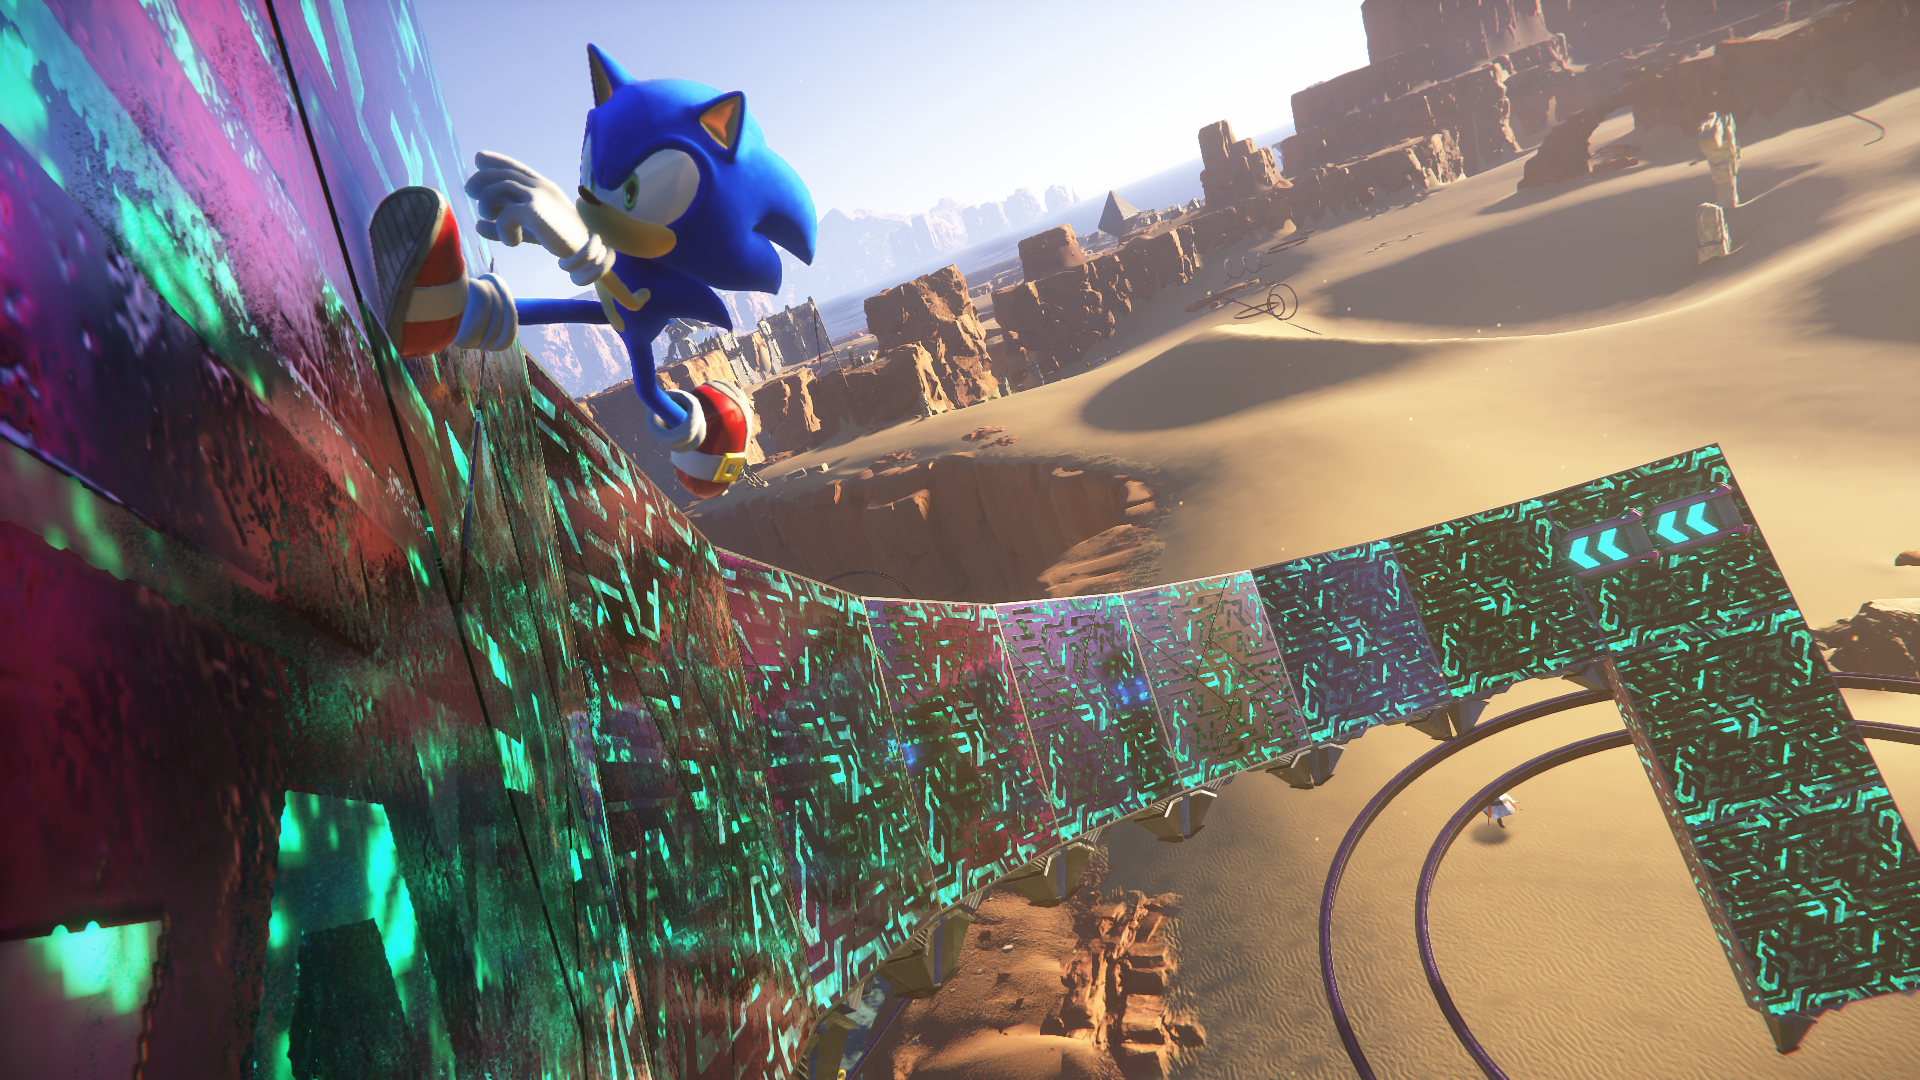 How to unlock the Sonic Frontiers map and islands